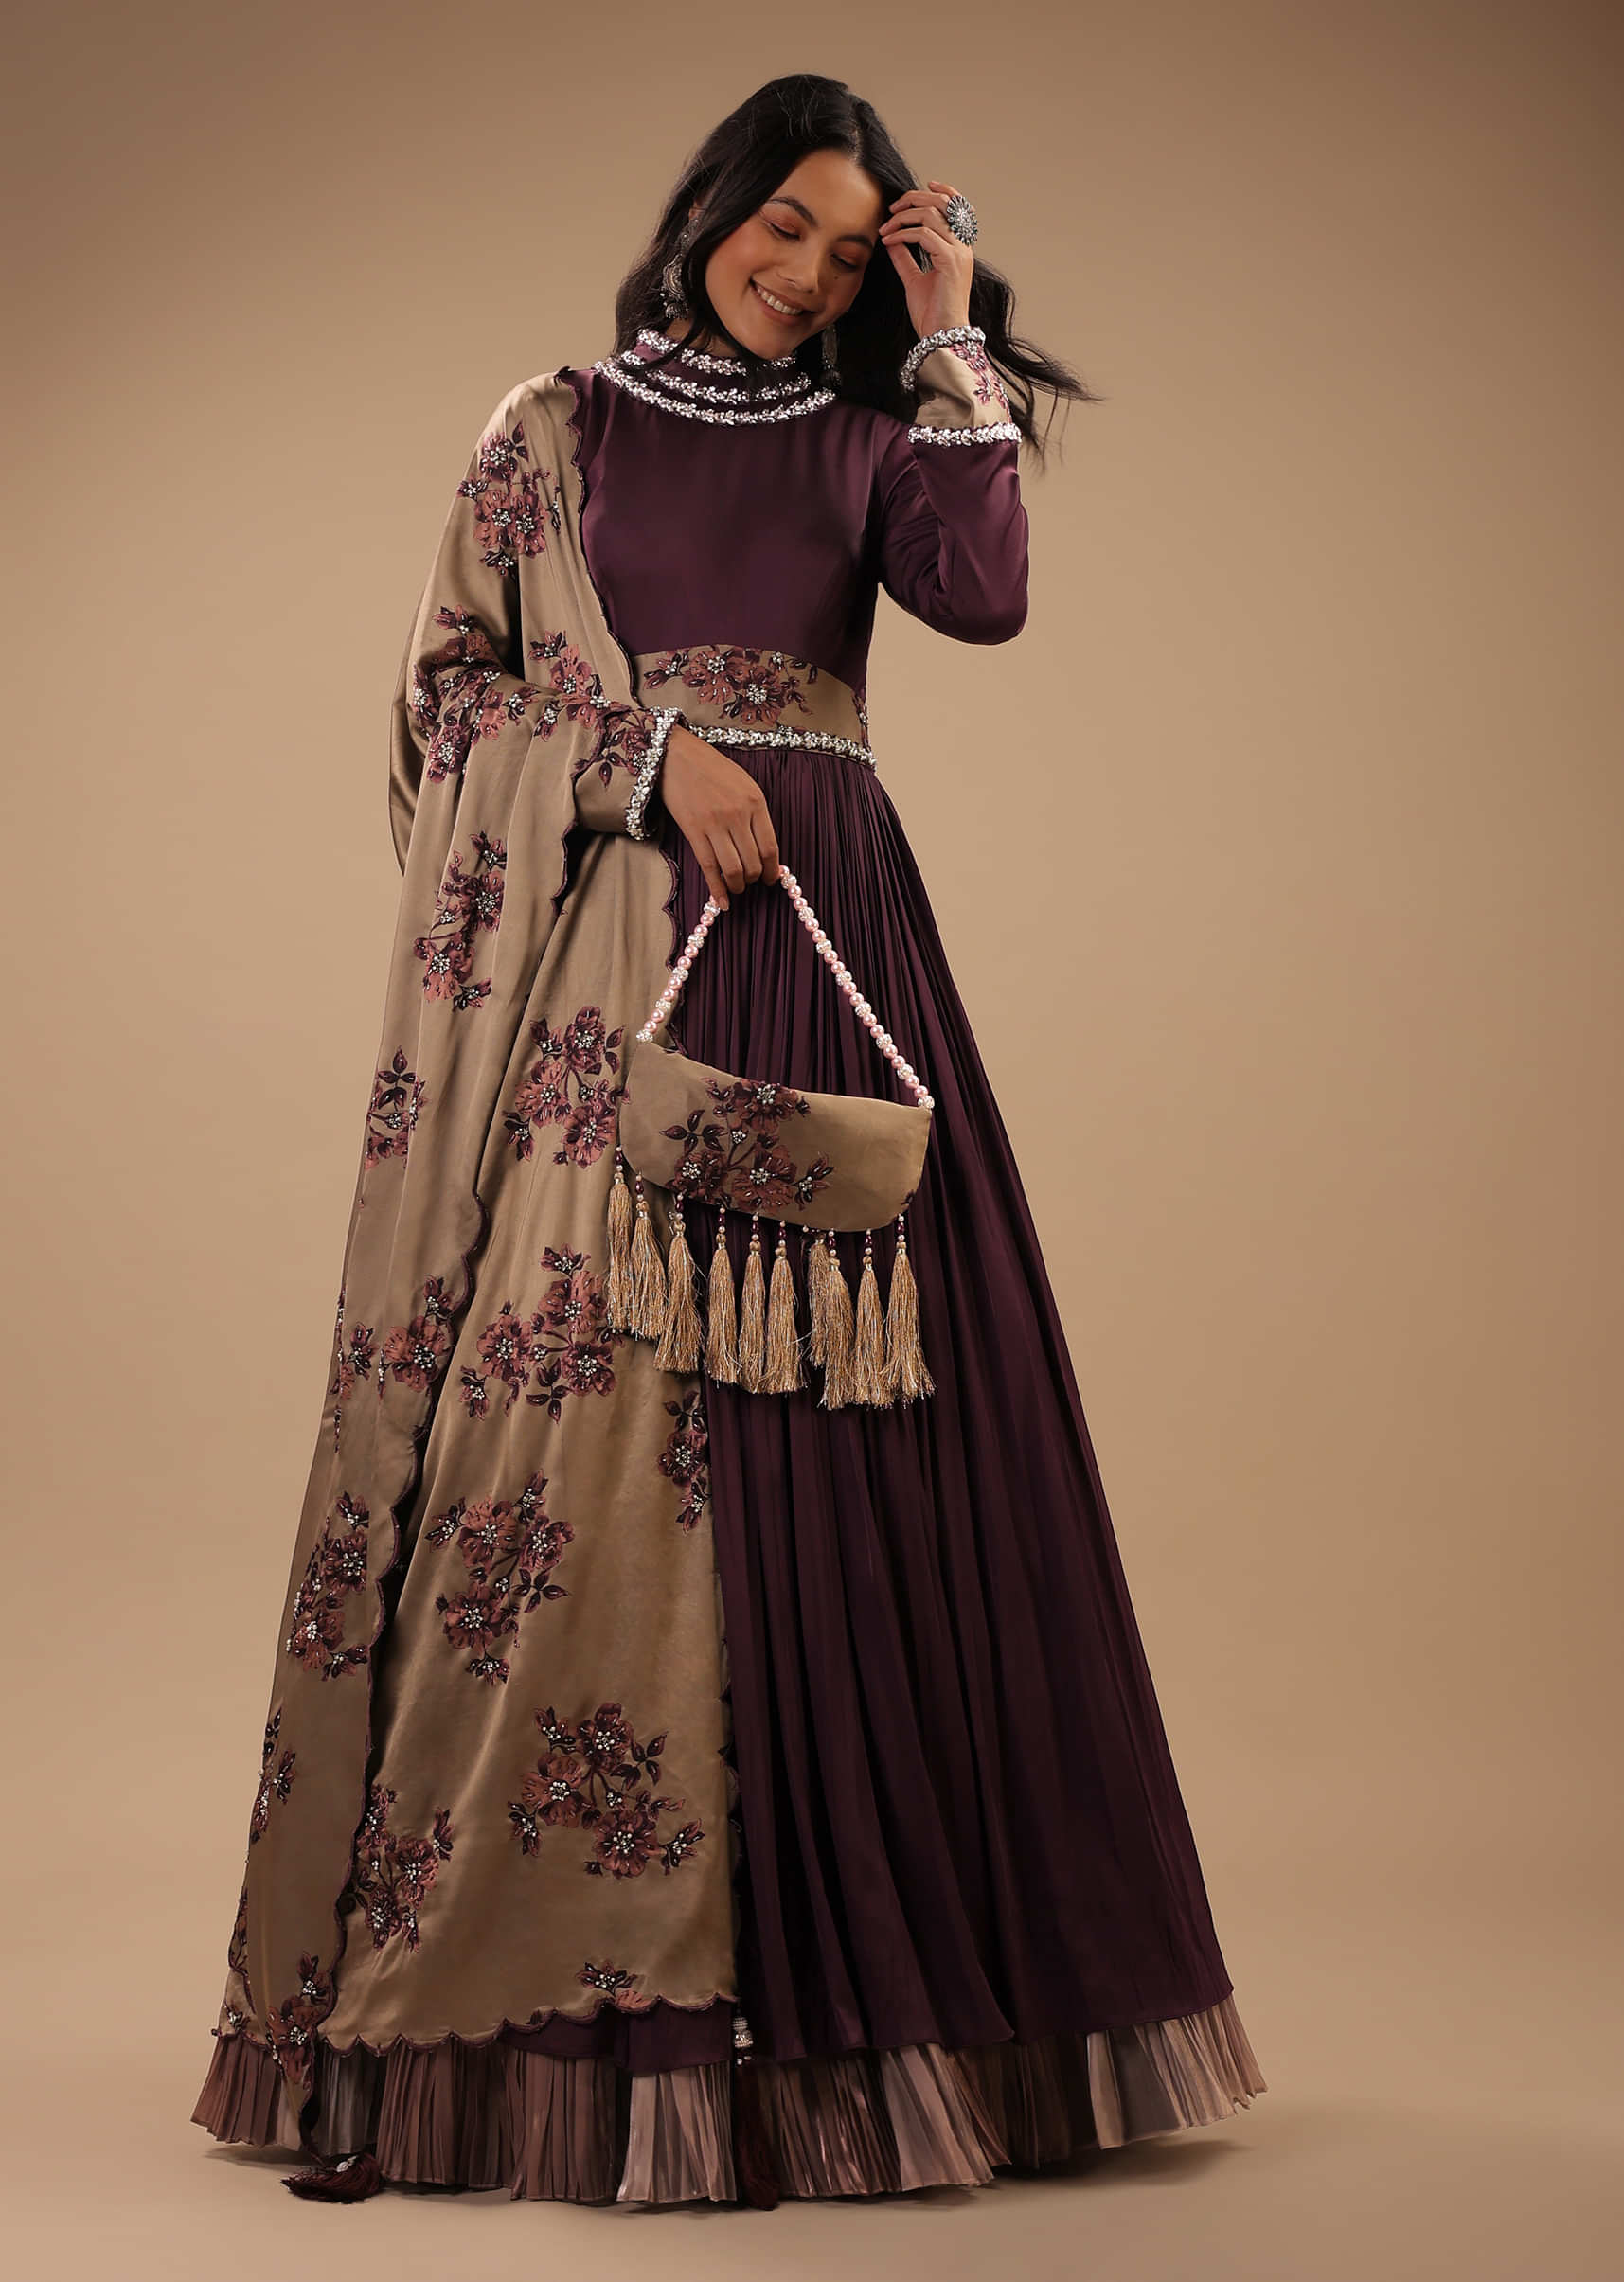 Purple Anarkali Suit With A Floral Printed Dupatta And Heavy Stone Work On Collar And Waist Belt